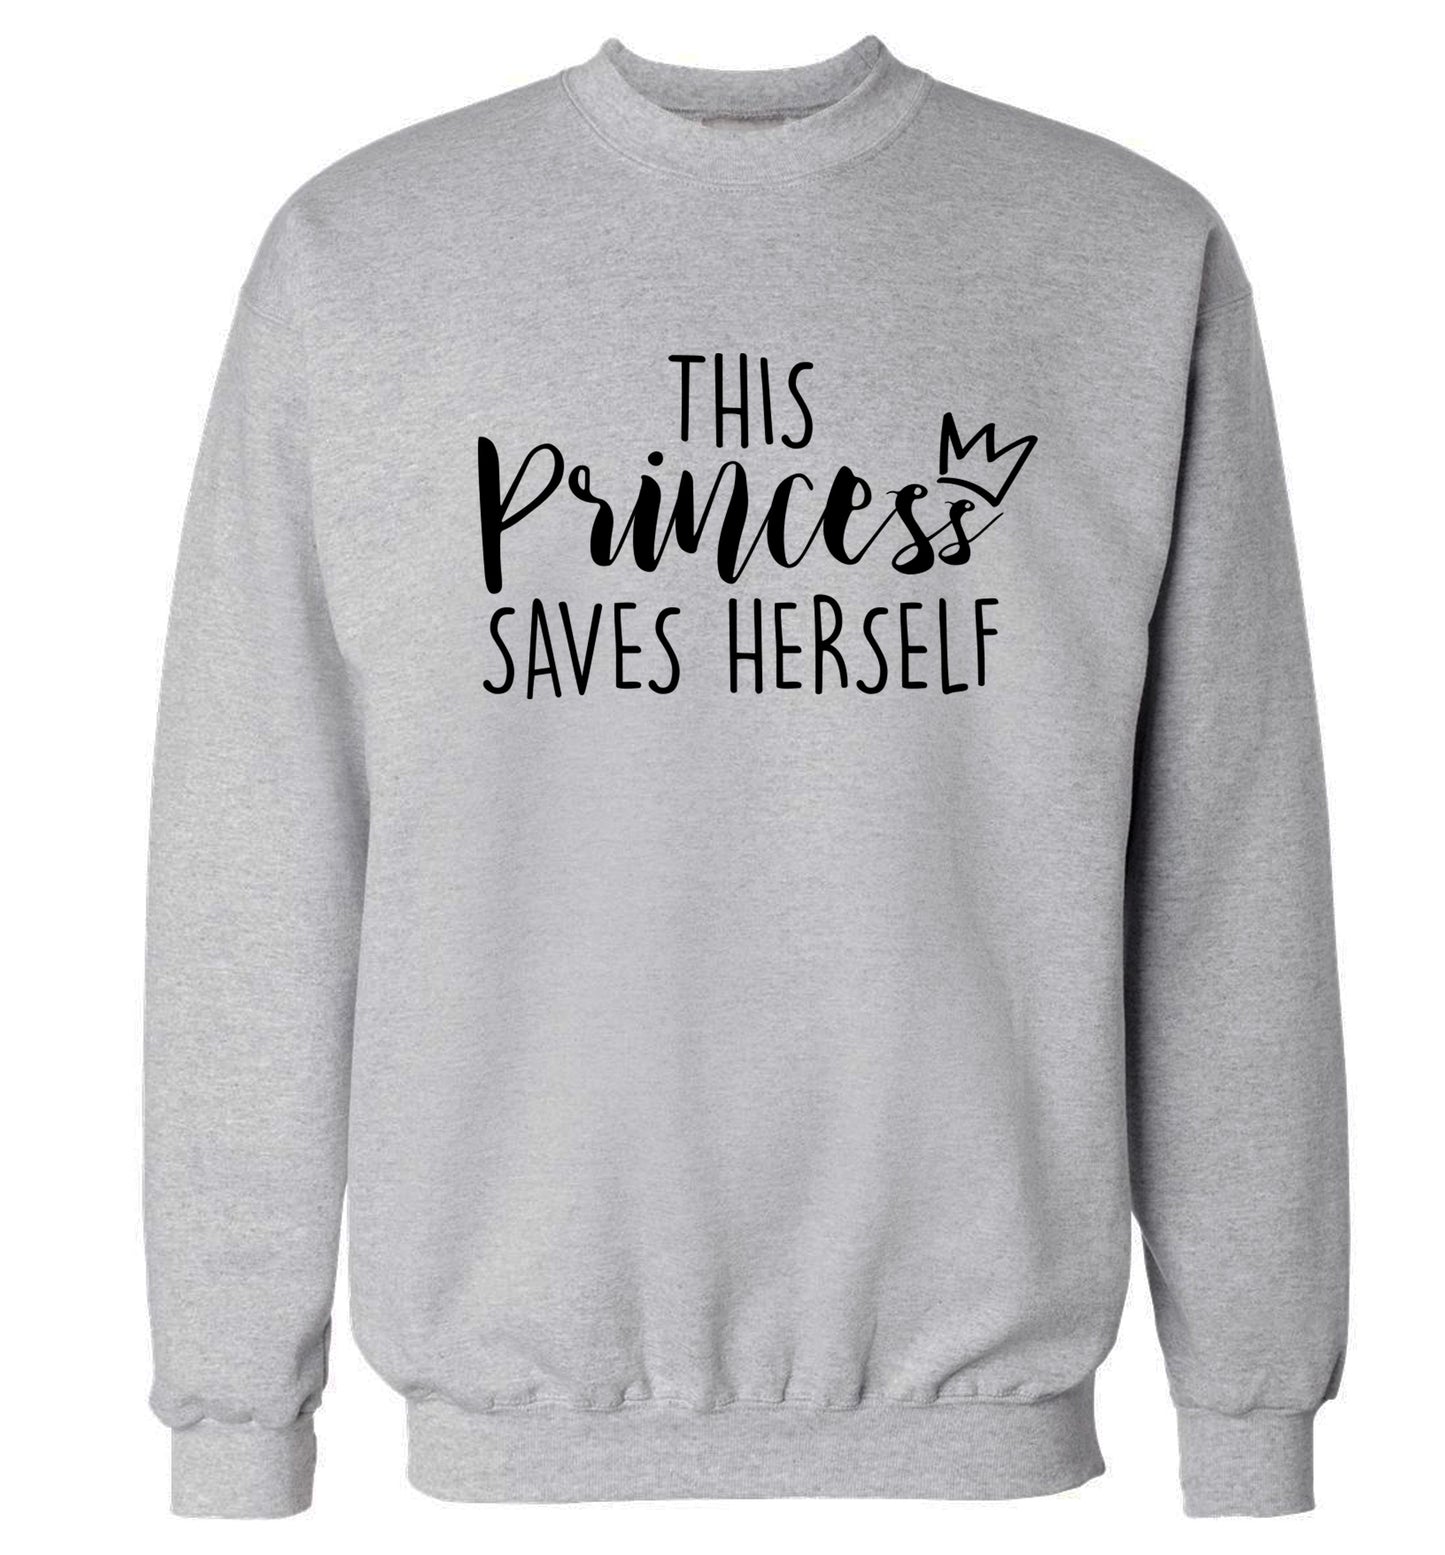 This princess saves herself Adult's unisex grey Sweater 2XL